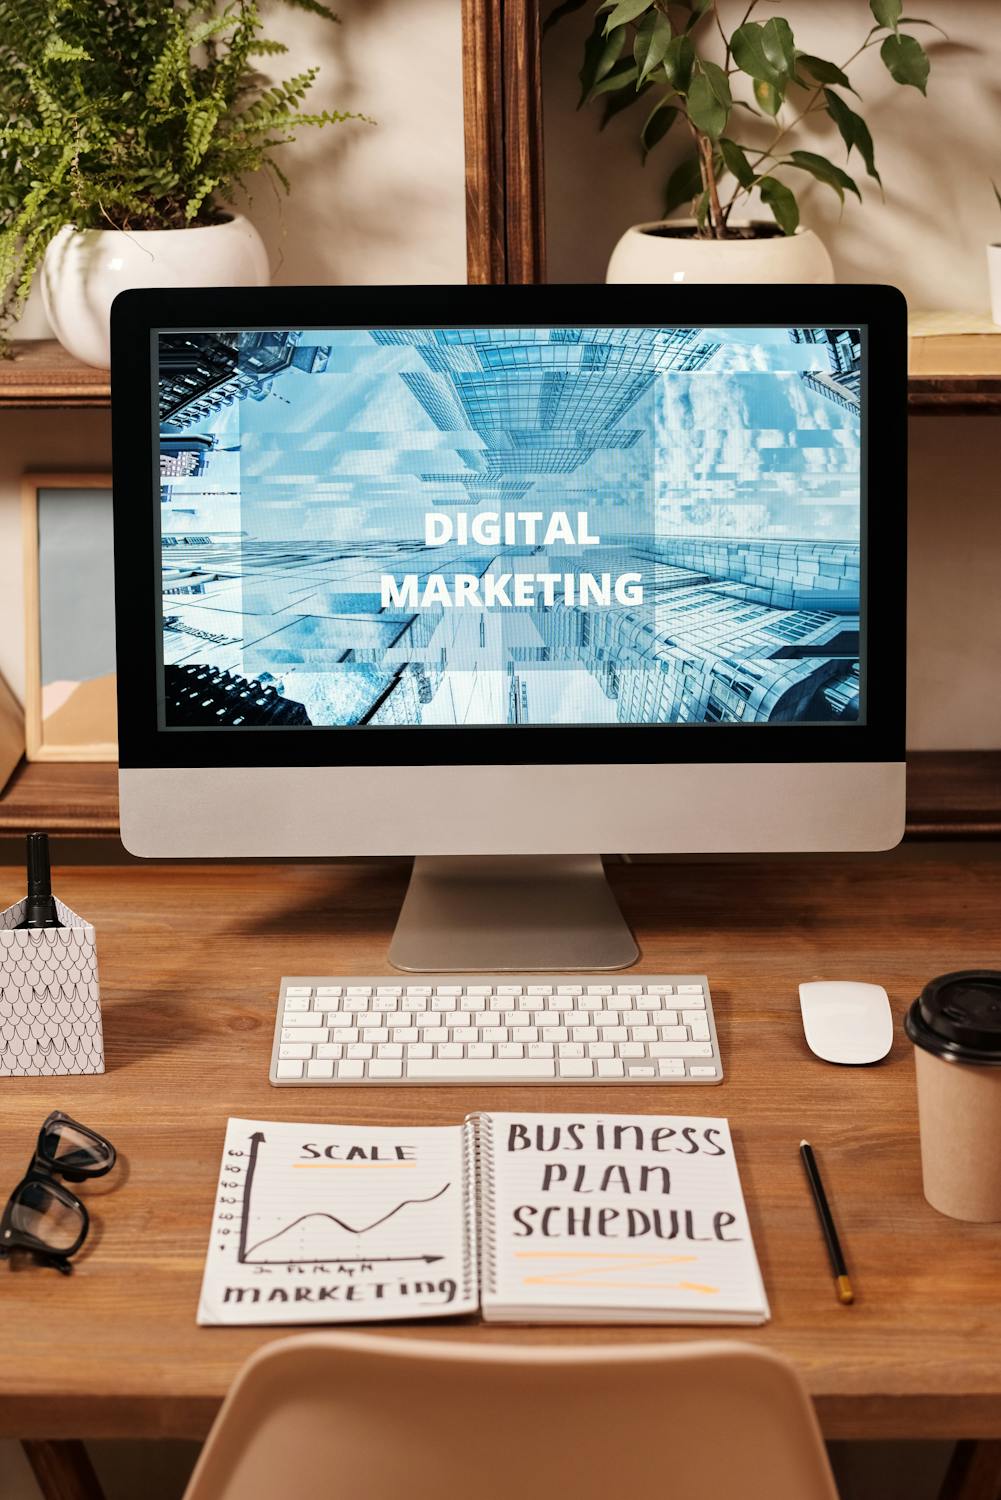 Will Digital Marketing Render Traditional Methods? 10 Perspectives to Consider